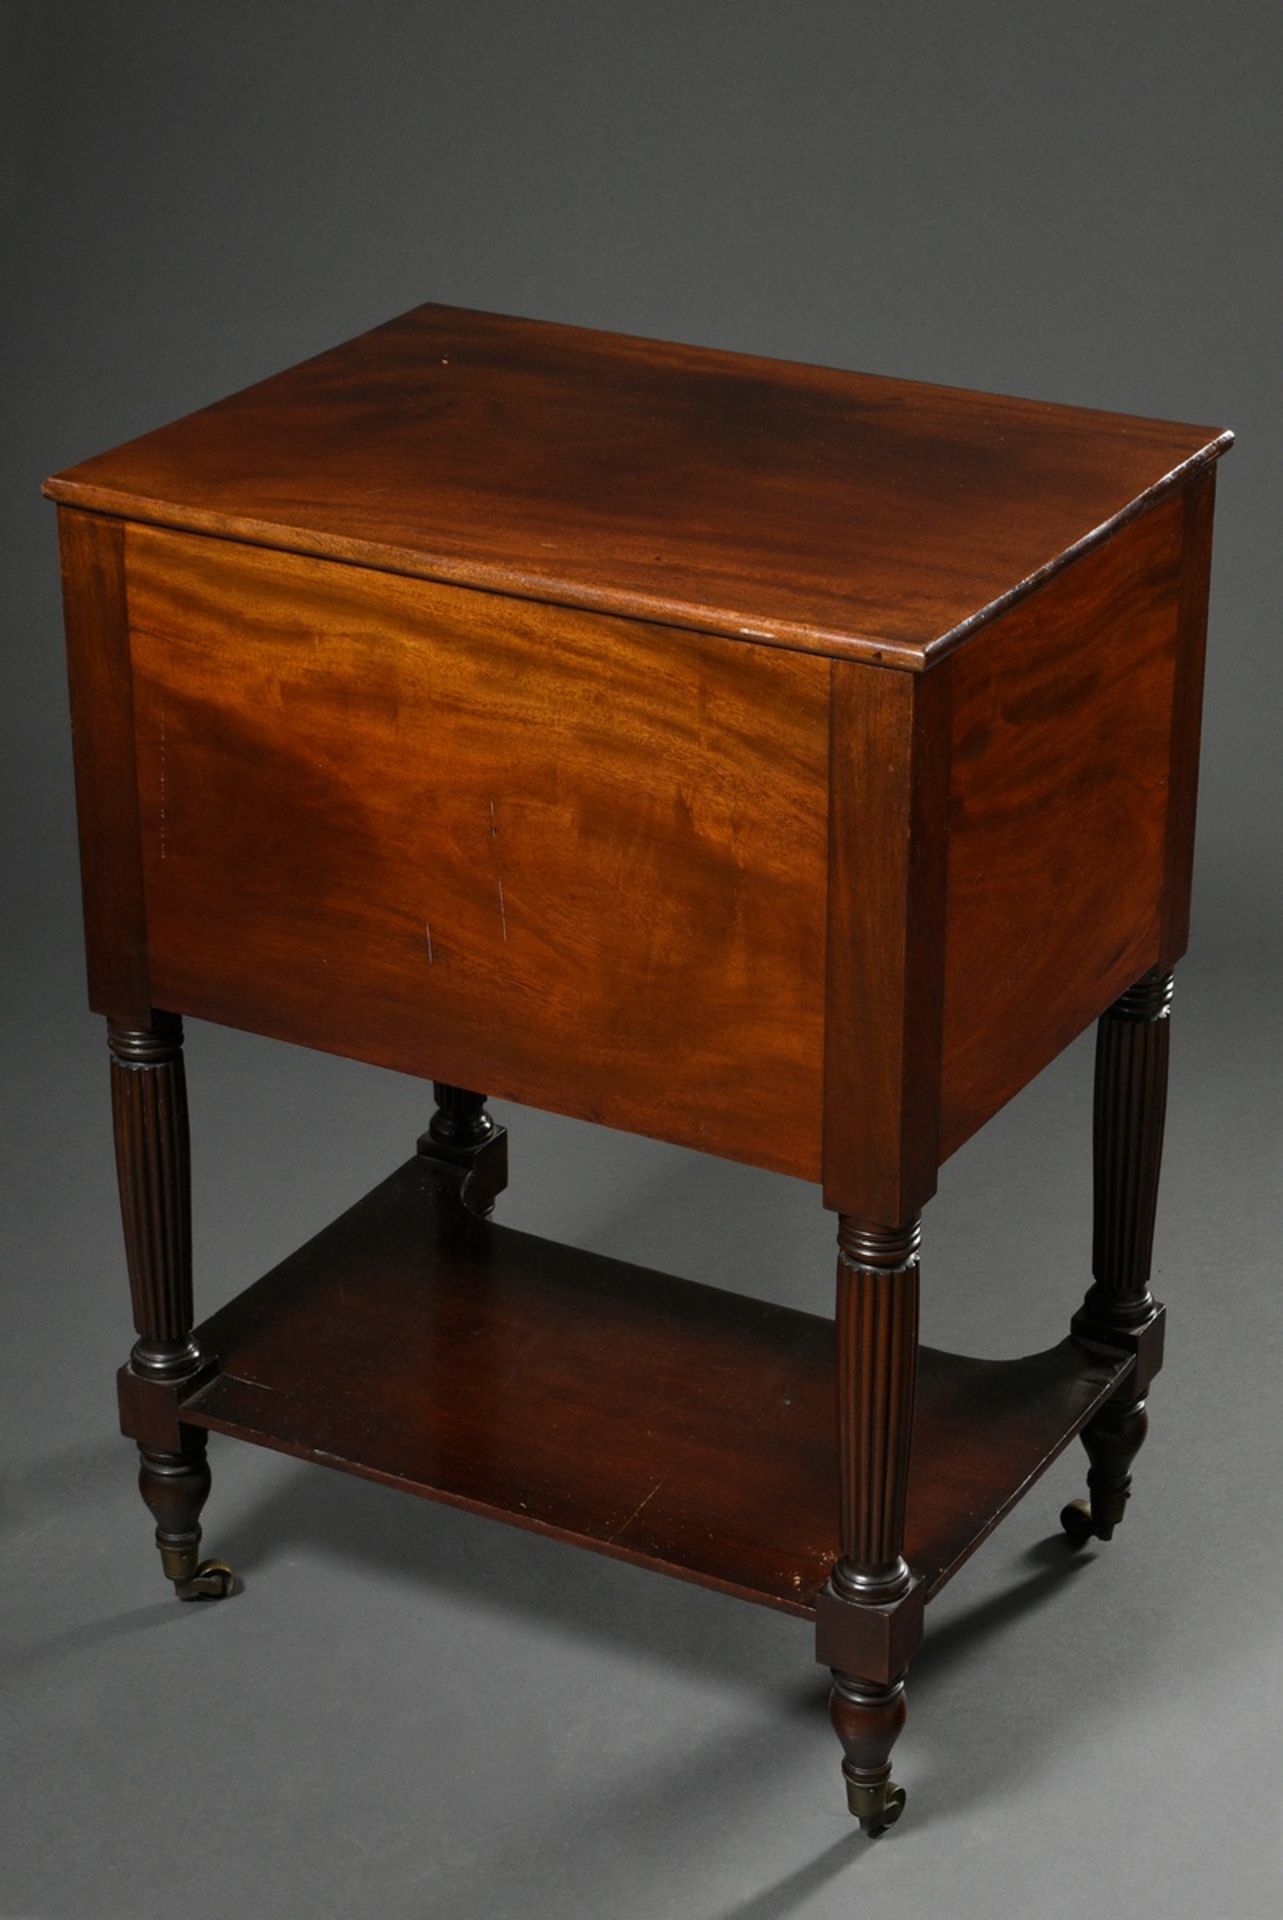 Three-bay occasional furniture on fluted legs with pull-out writing drawer and punched leather top, - Image 6 of 6